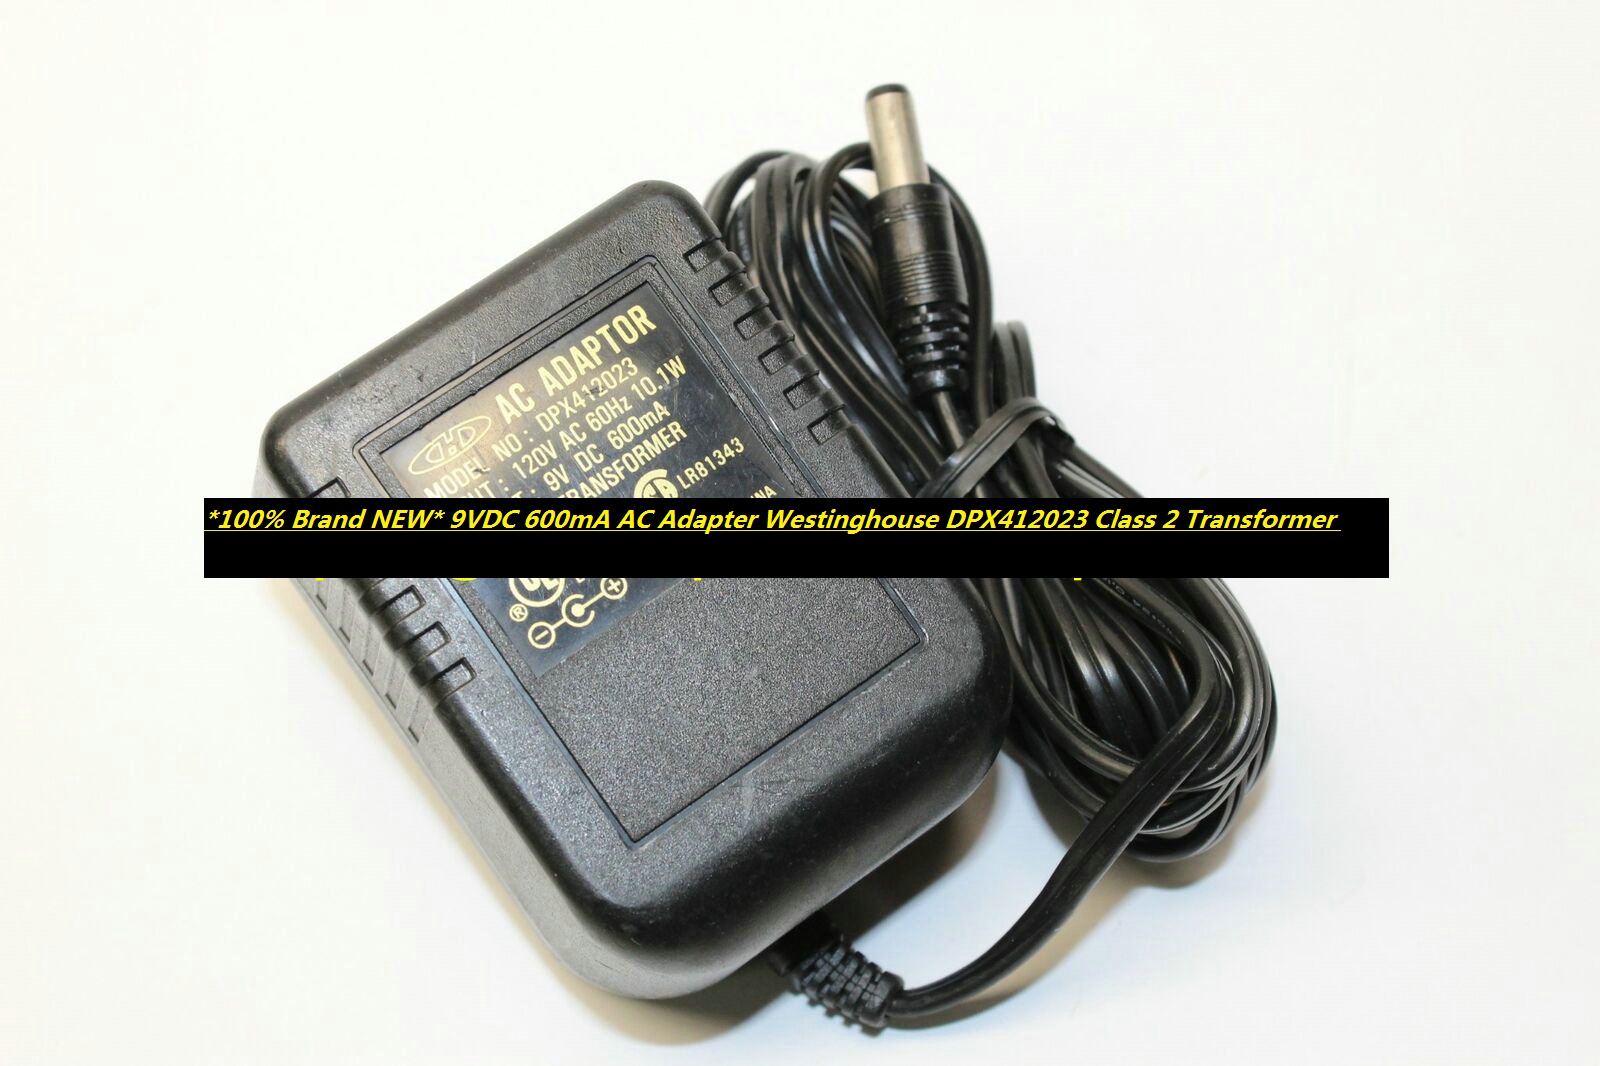 *100% Brand NEW* 9VDC 600mA AC Adapter Westinghouse DPX412023 Class 2 Transformer Power POWER SUPPLY